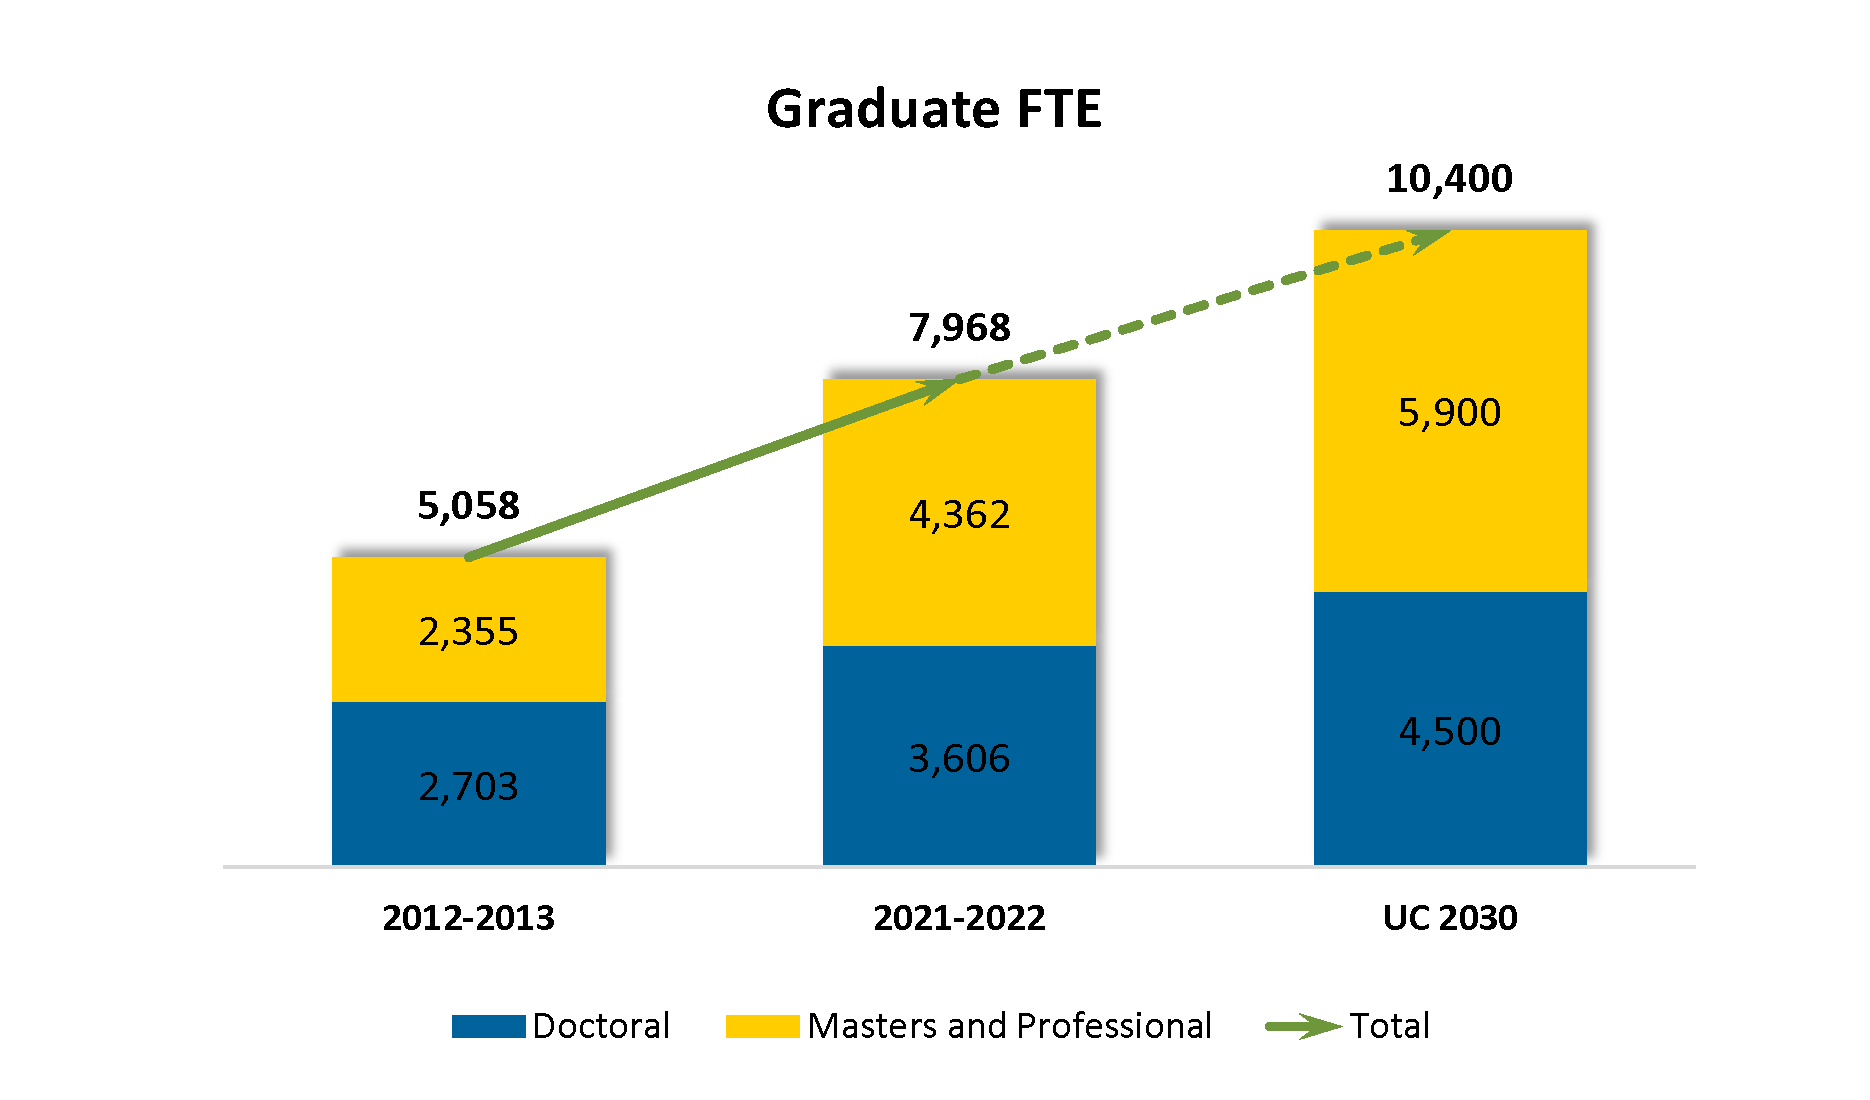 This shows the growth in graduate students at UC San Diego.